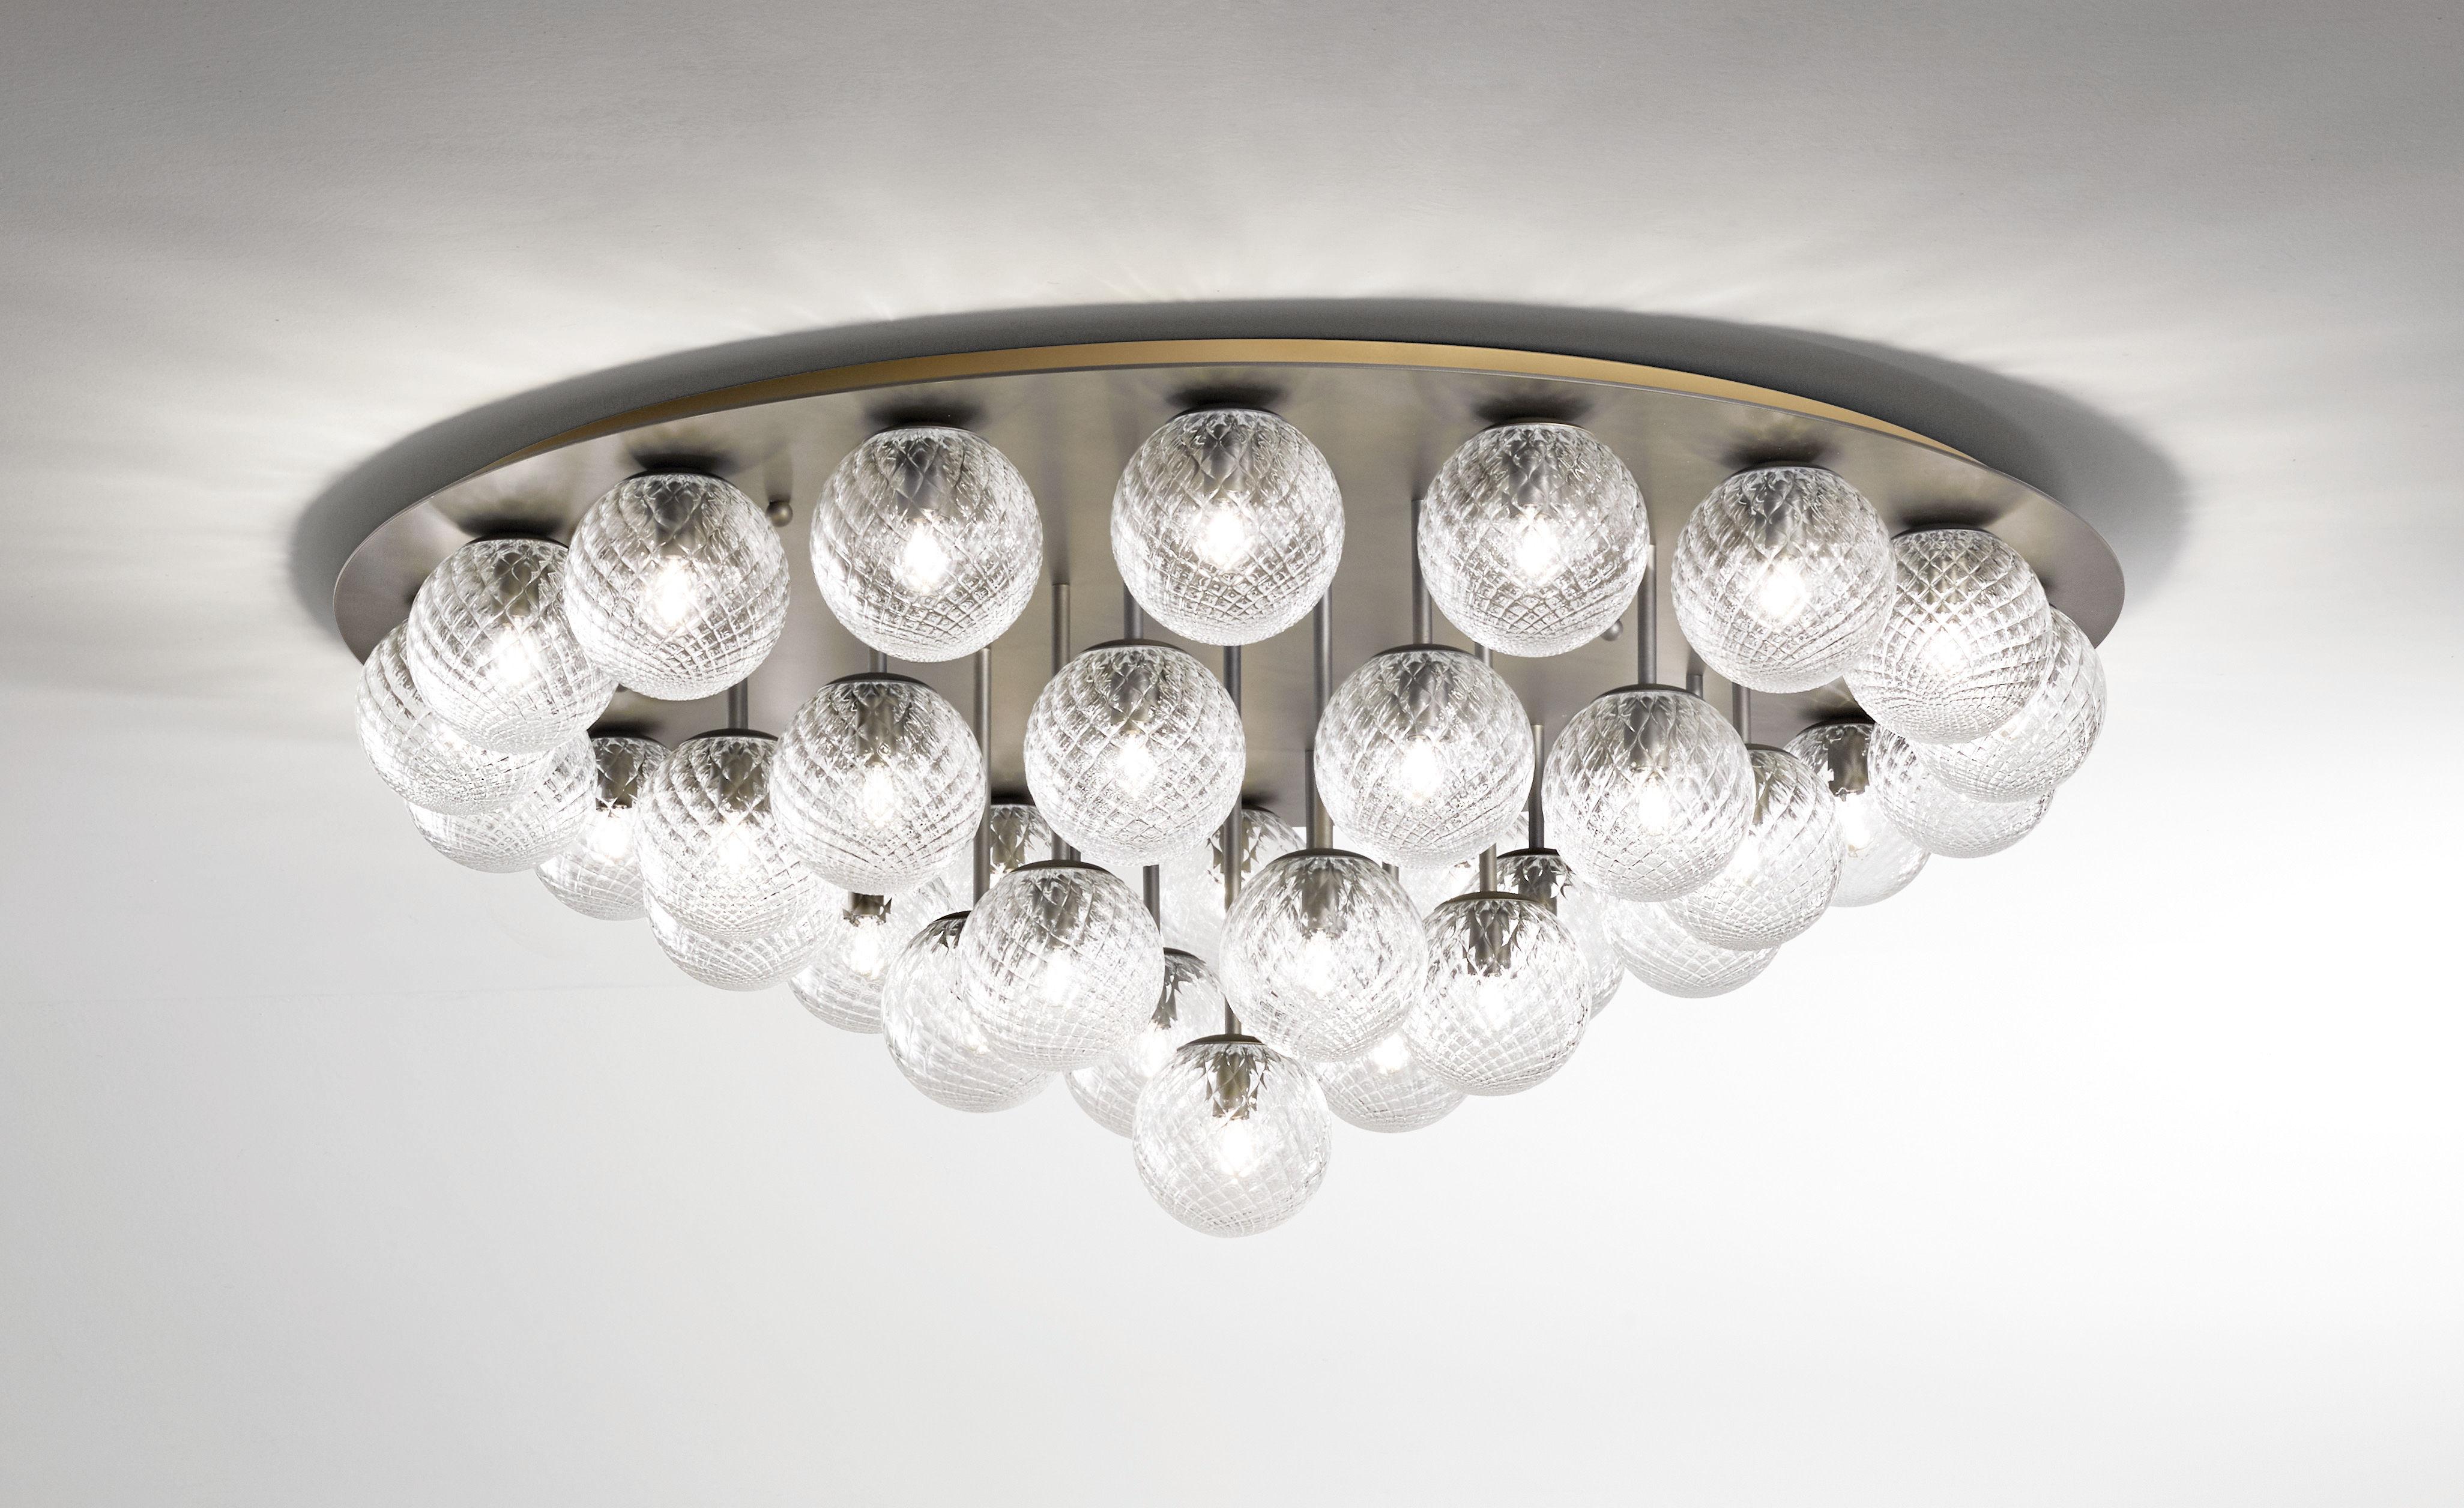 Italian modern flush mount with clear or smoky textured Murano glass globes, mounted on round ceiling plate in satin bronzato finish / Made in Italy by Fabio Ltd
37 lights / E12 or E14 type / max 40W each
Measures: diameter 52 inches, height 20